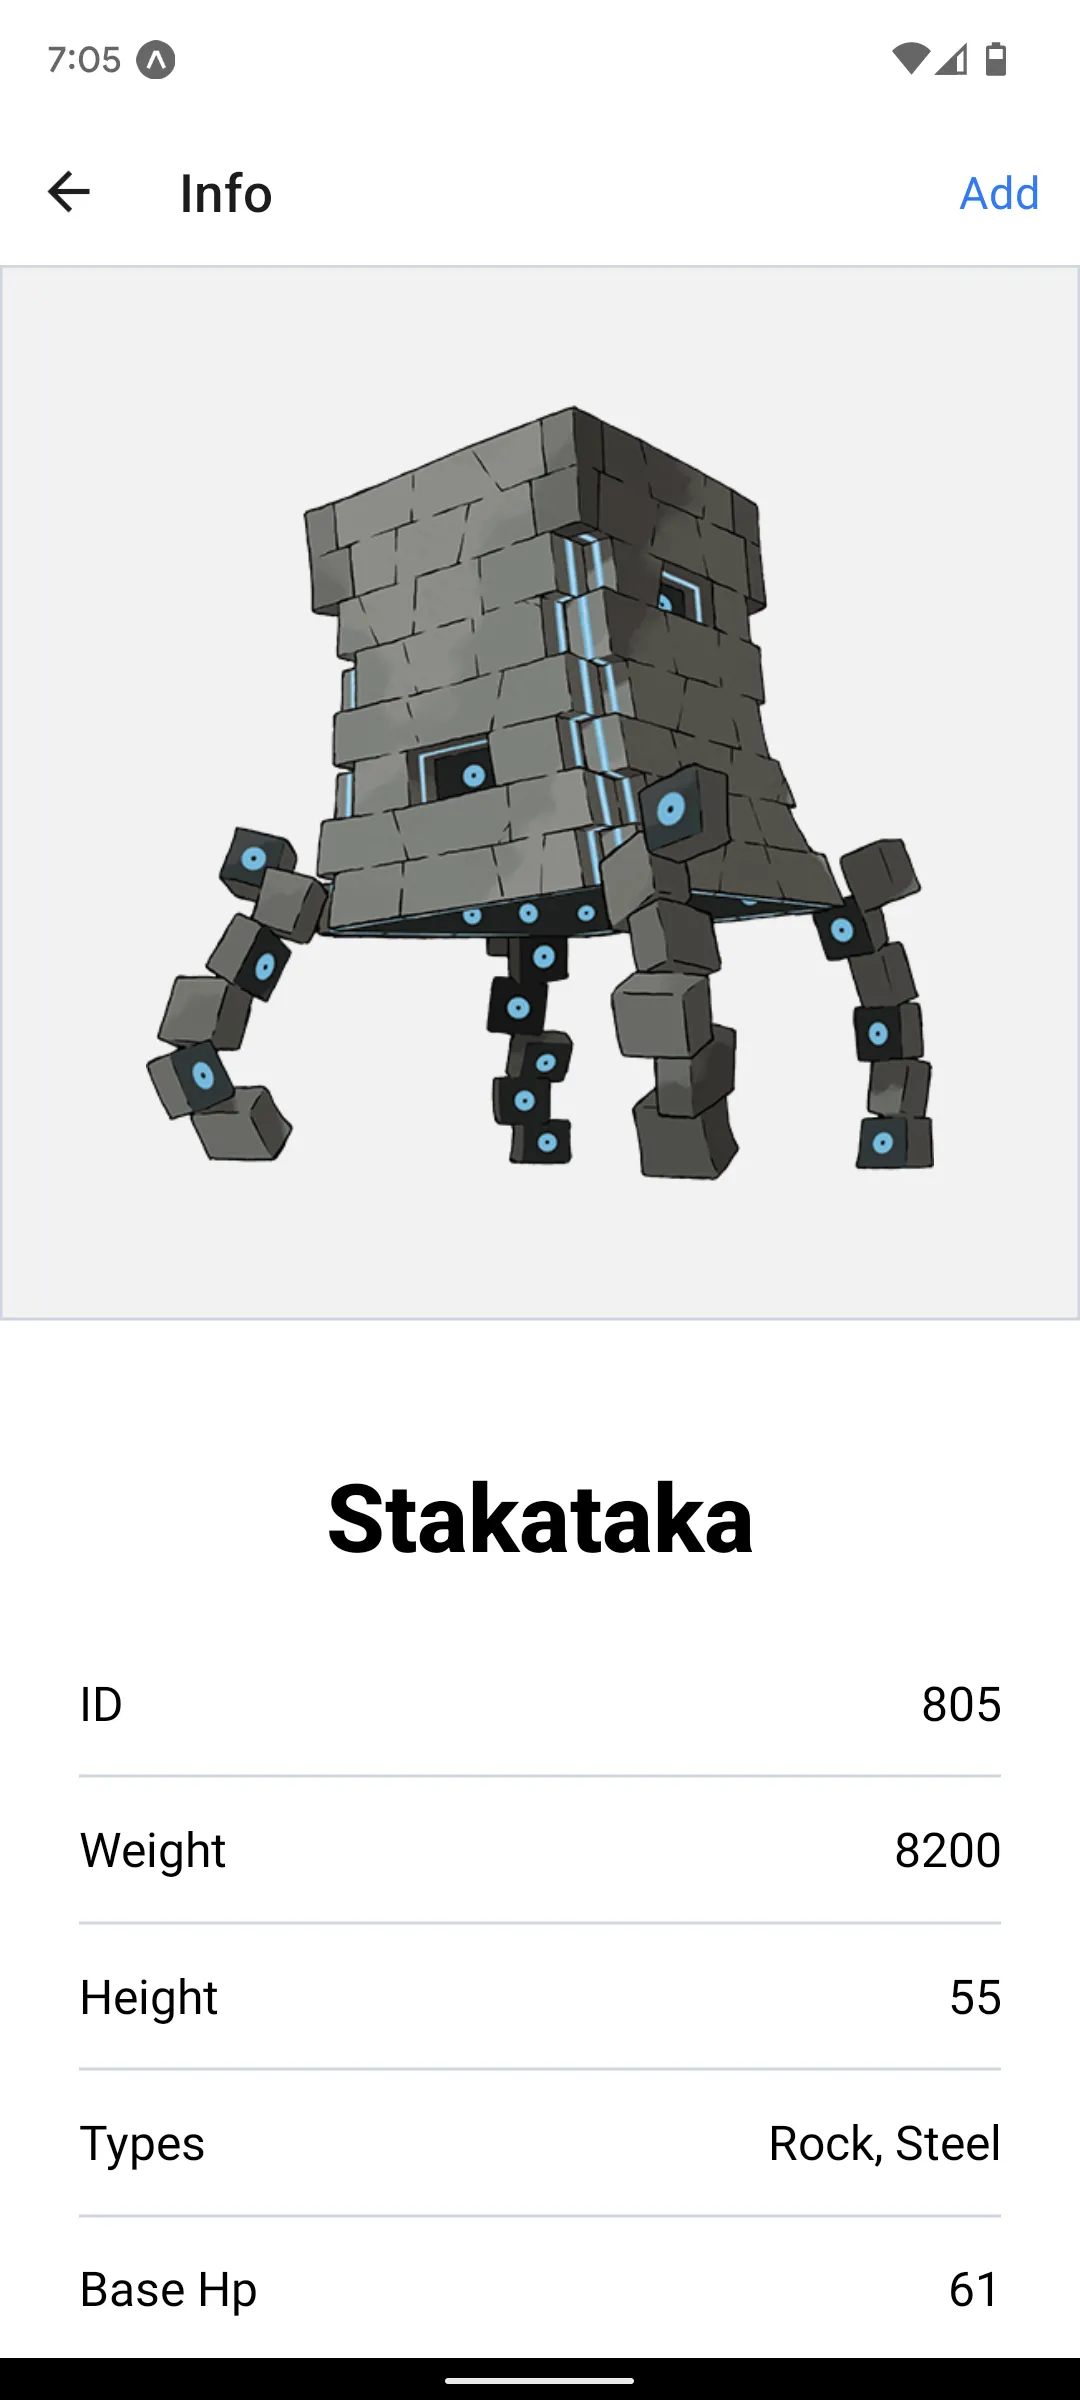 Info page in action for
Stakataka